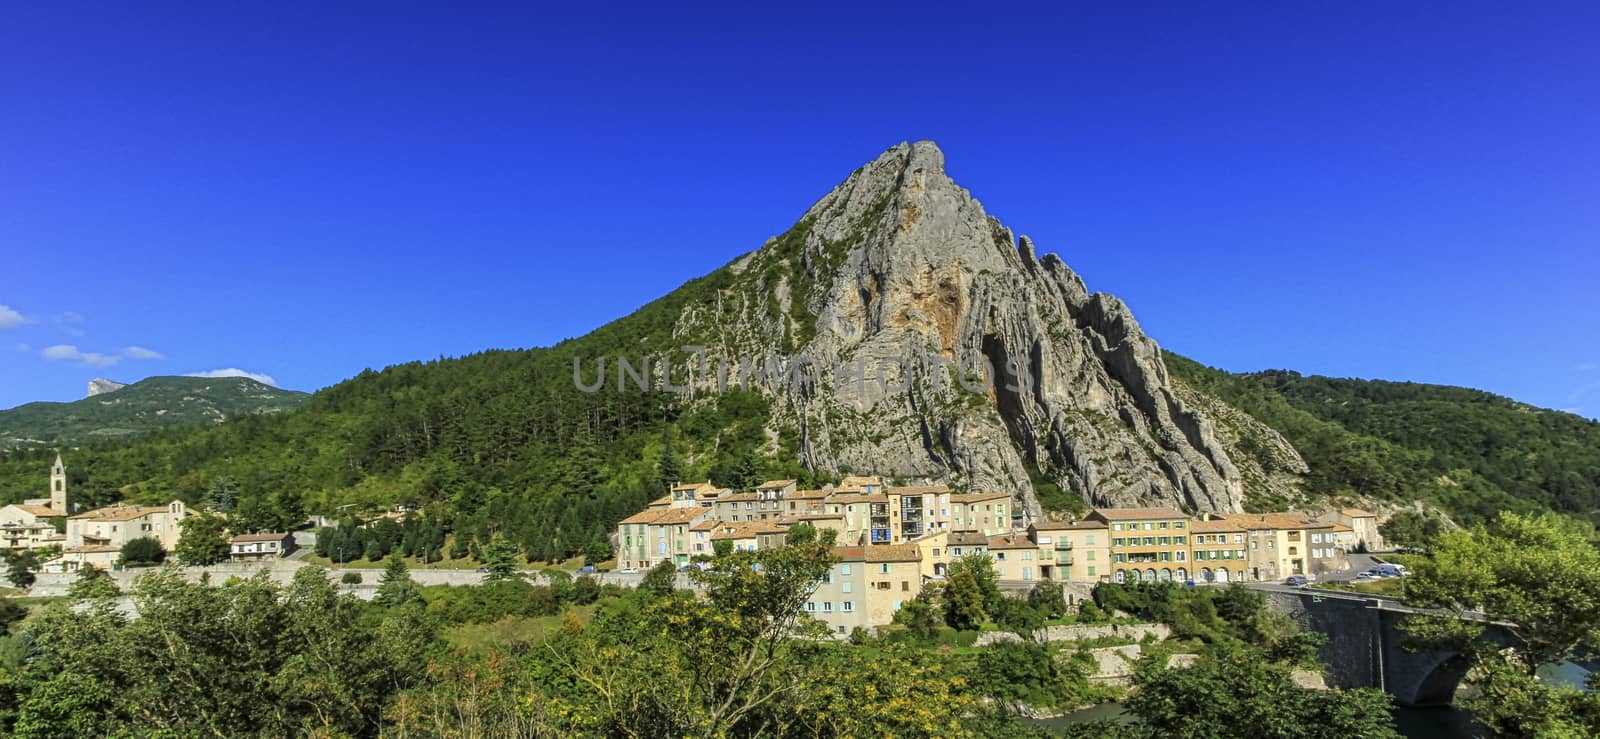 Sisteron city and Beaume big rock by beautiful day, France